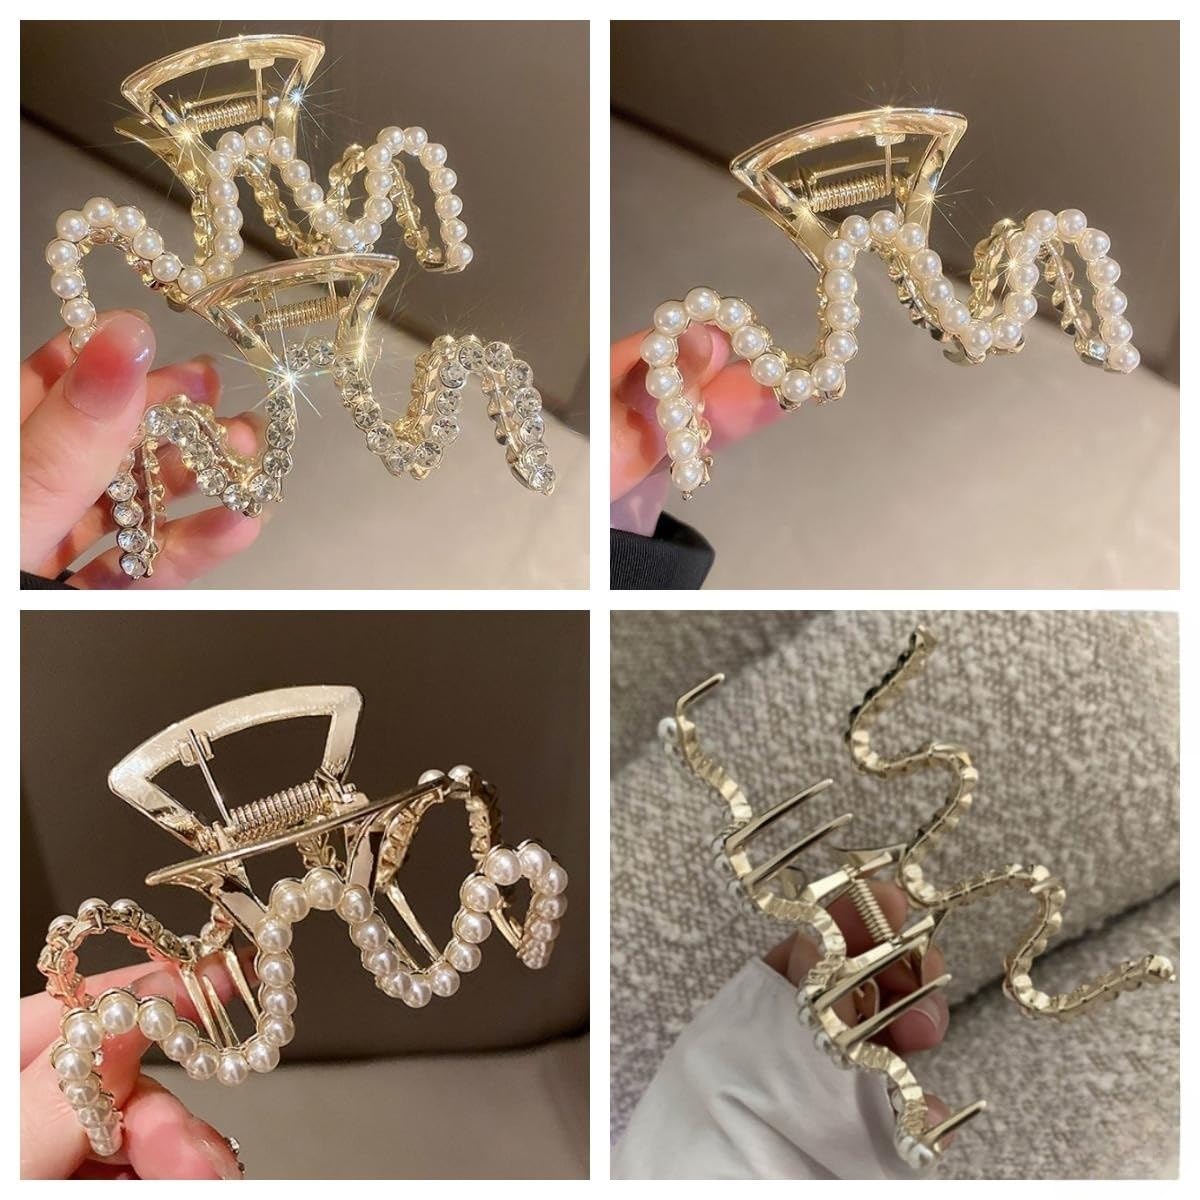 Rhinestone Hair Clips, Textention 3.4 Inch Pearl Claw Clips for Thick Hair, Crystal Metal Hair Jaw Clamps Fashion Hair Accessories for Women Bride Bridesmaid (2 Pack)